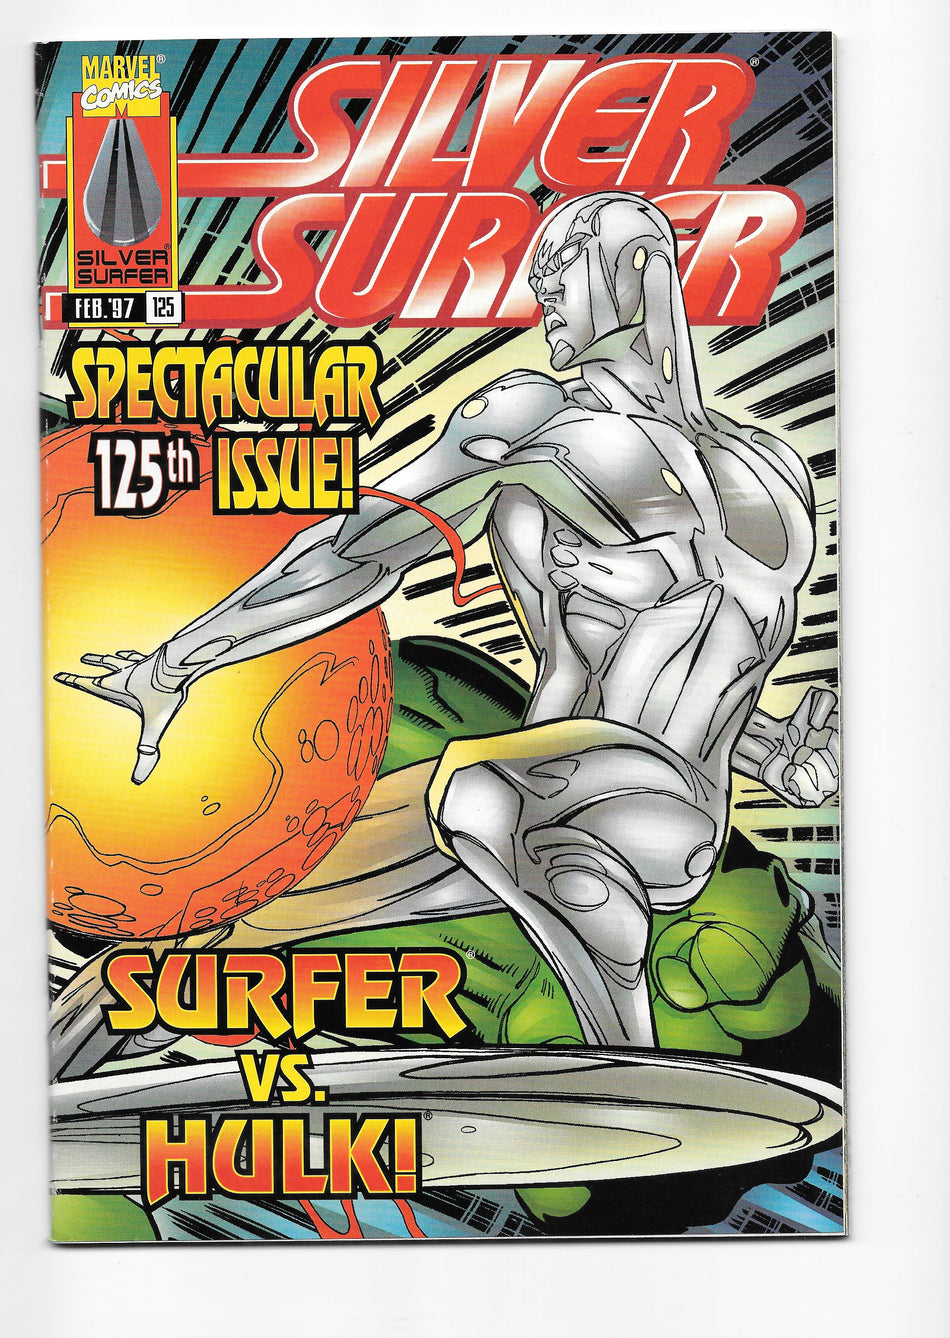 Photo of Silver Surfer, Vol. 3 (1996)  Iss 125 Near Mint  Comic sold by Stronghold Collectibles